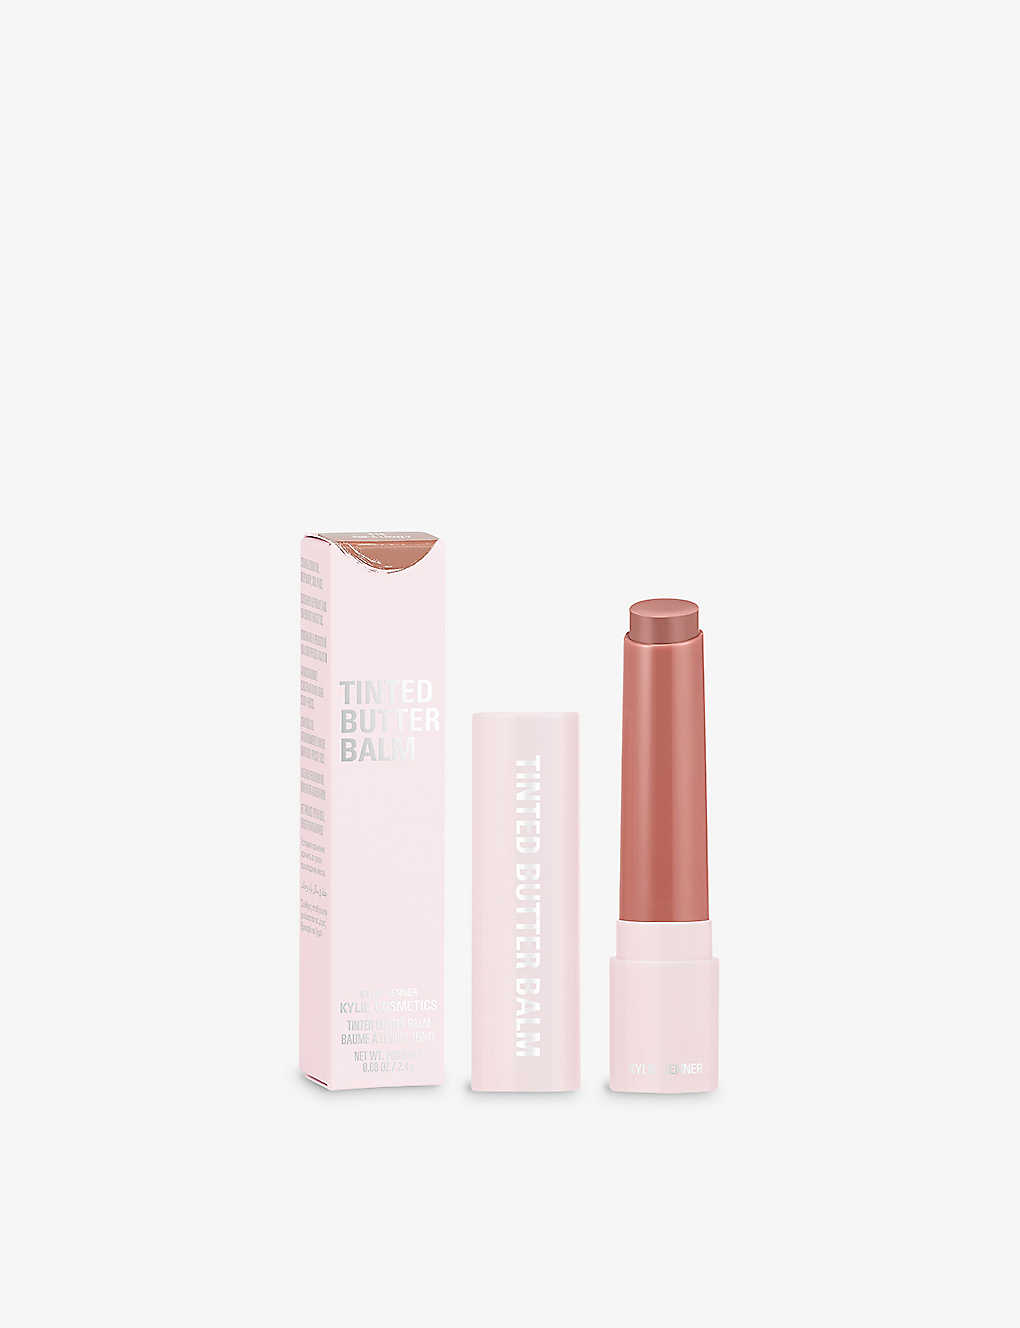 Kylie By Kylie Jenner Shes Lovely Tinted Butter Balm 2.4g